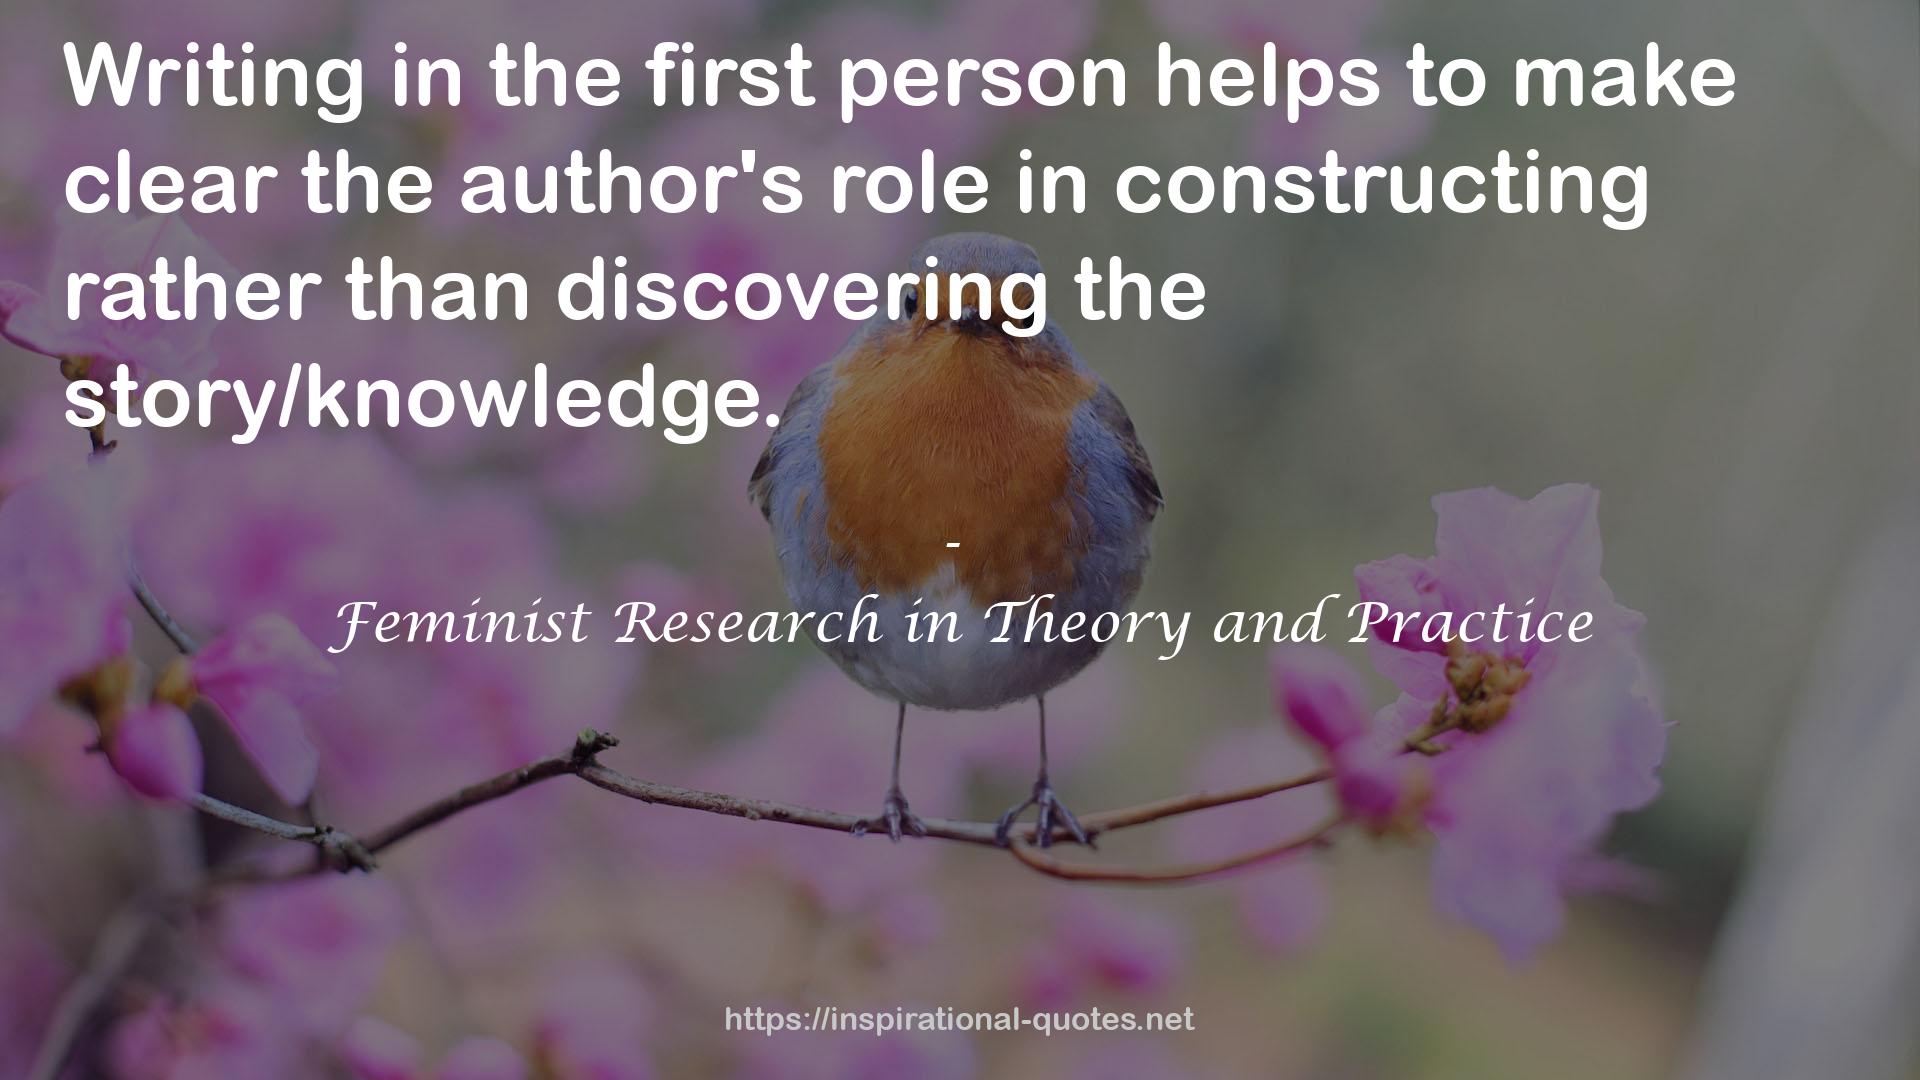 Feminist Research in Theory and Practice QUOTES